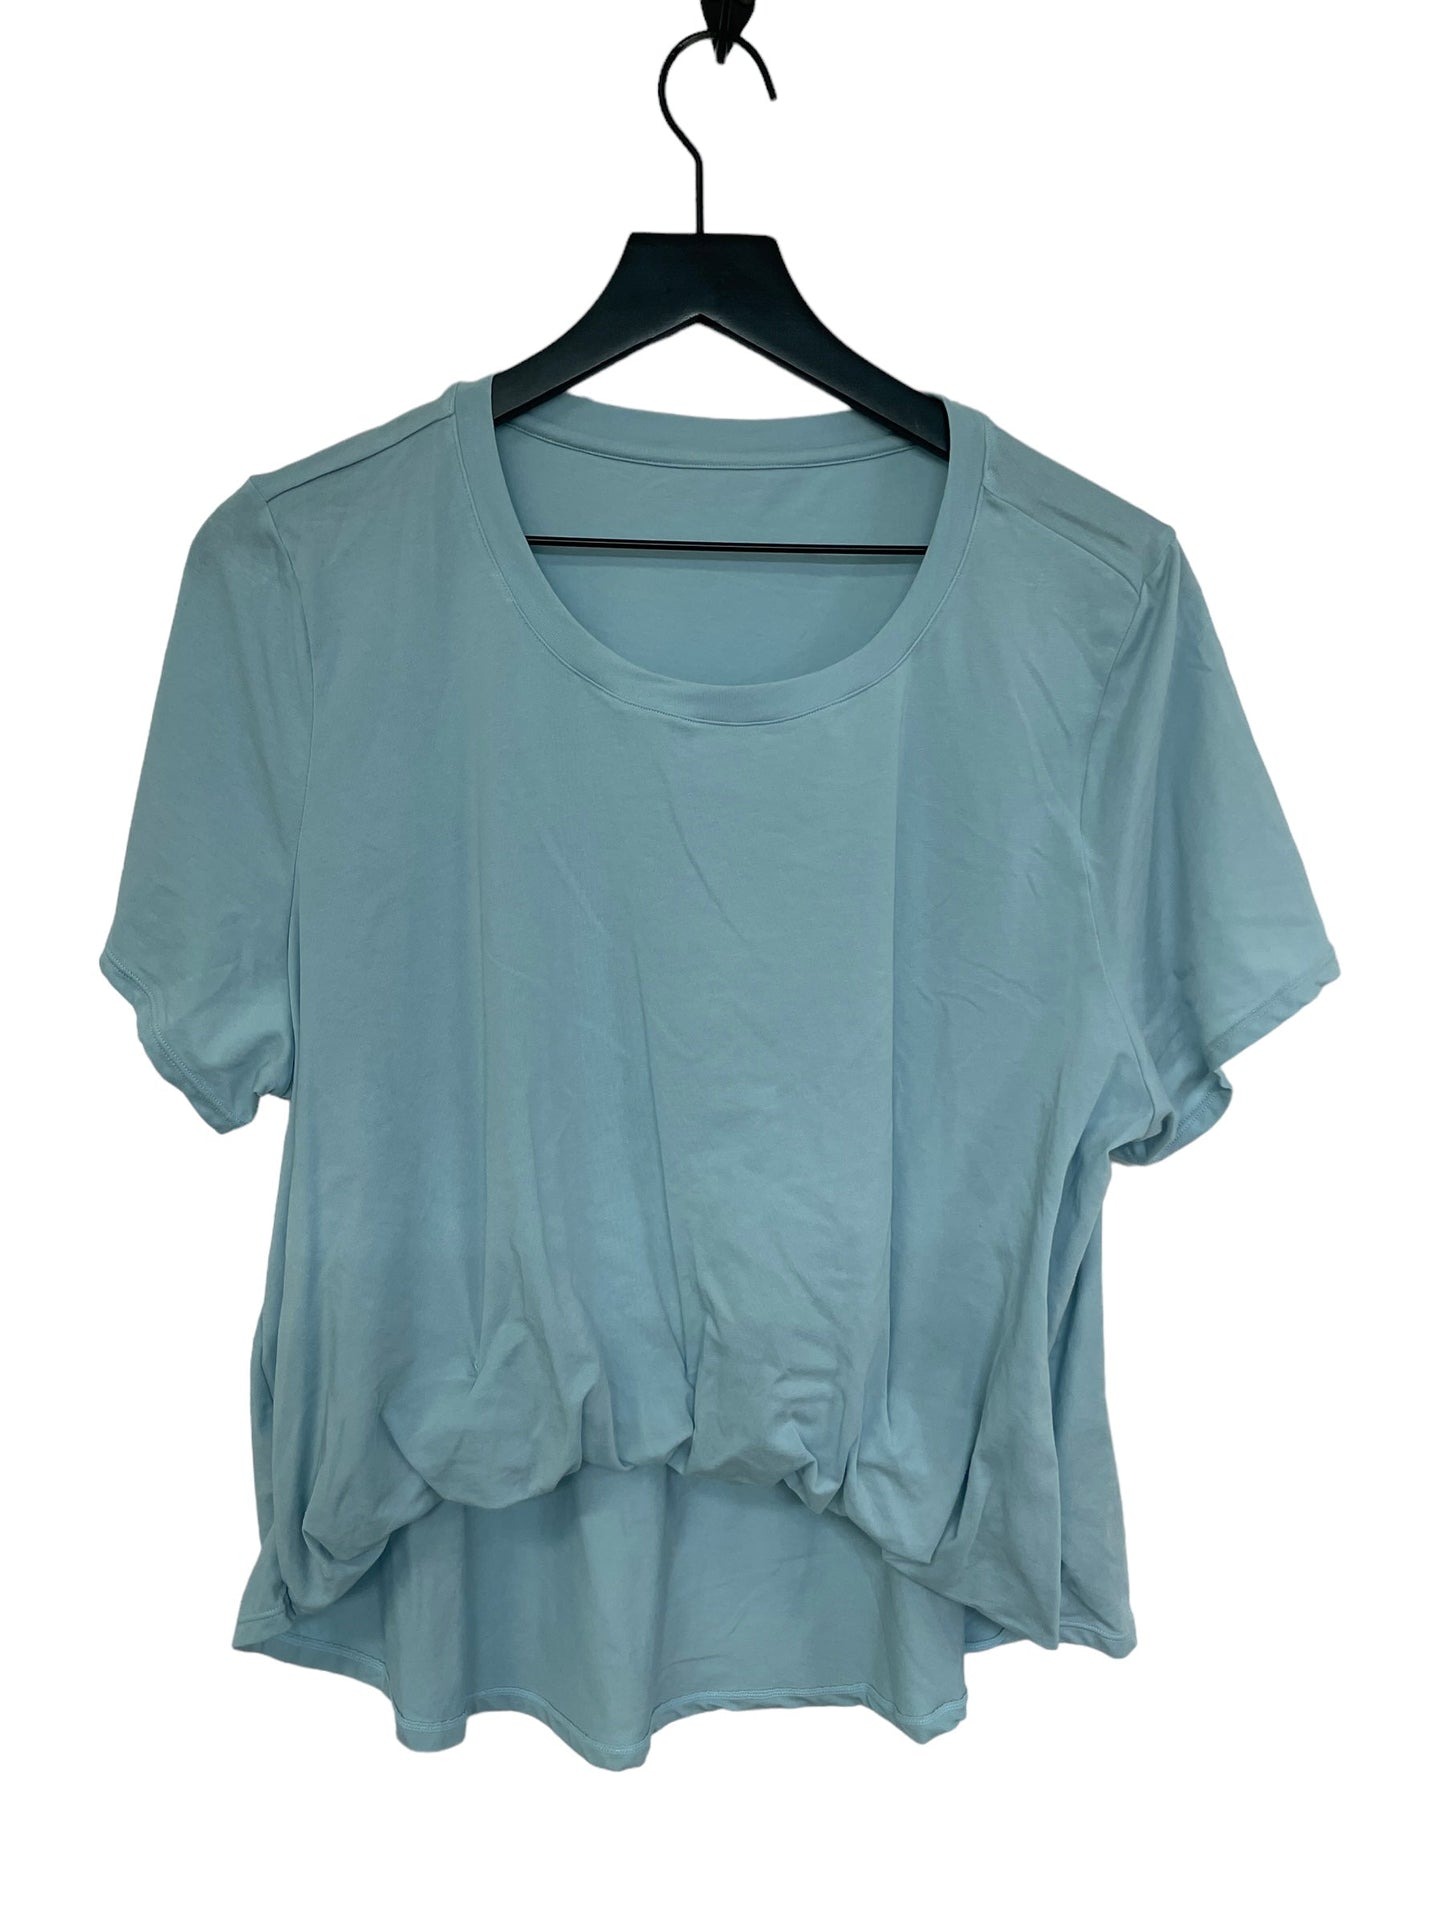 Blue Athletic Top Short Sleeve Zyia, Size L